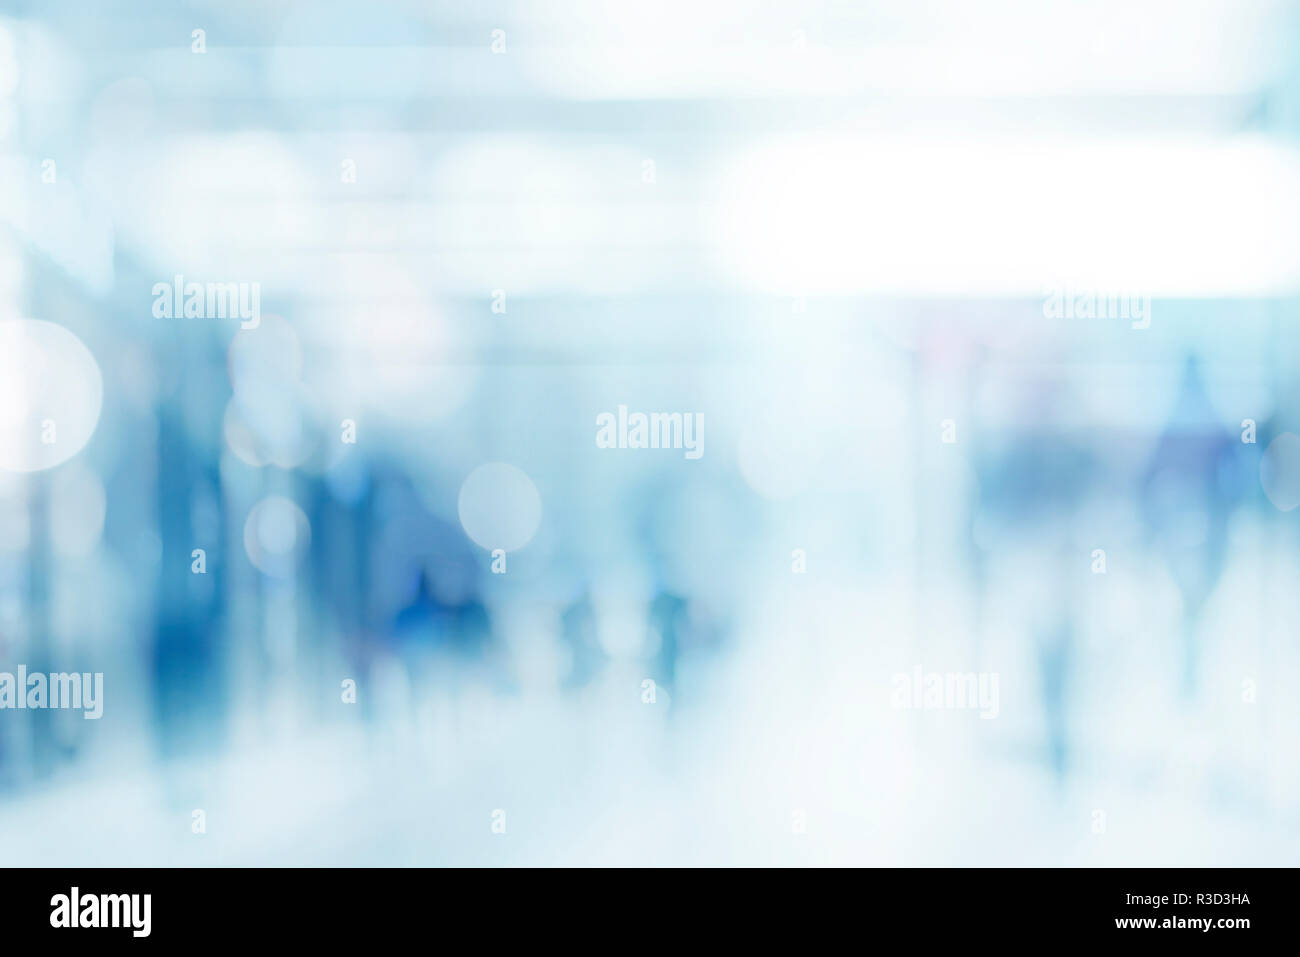 abstract defocused blurred empty space technology background with silhouettes of unrecognizable people Stock Photo